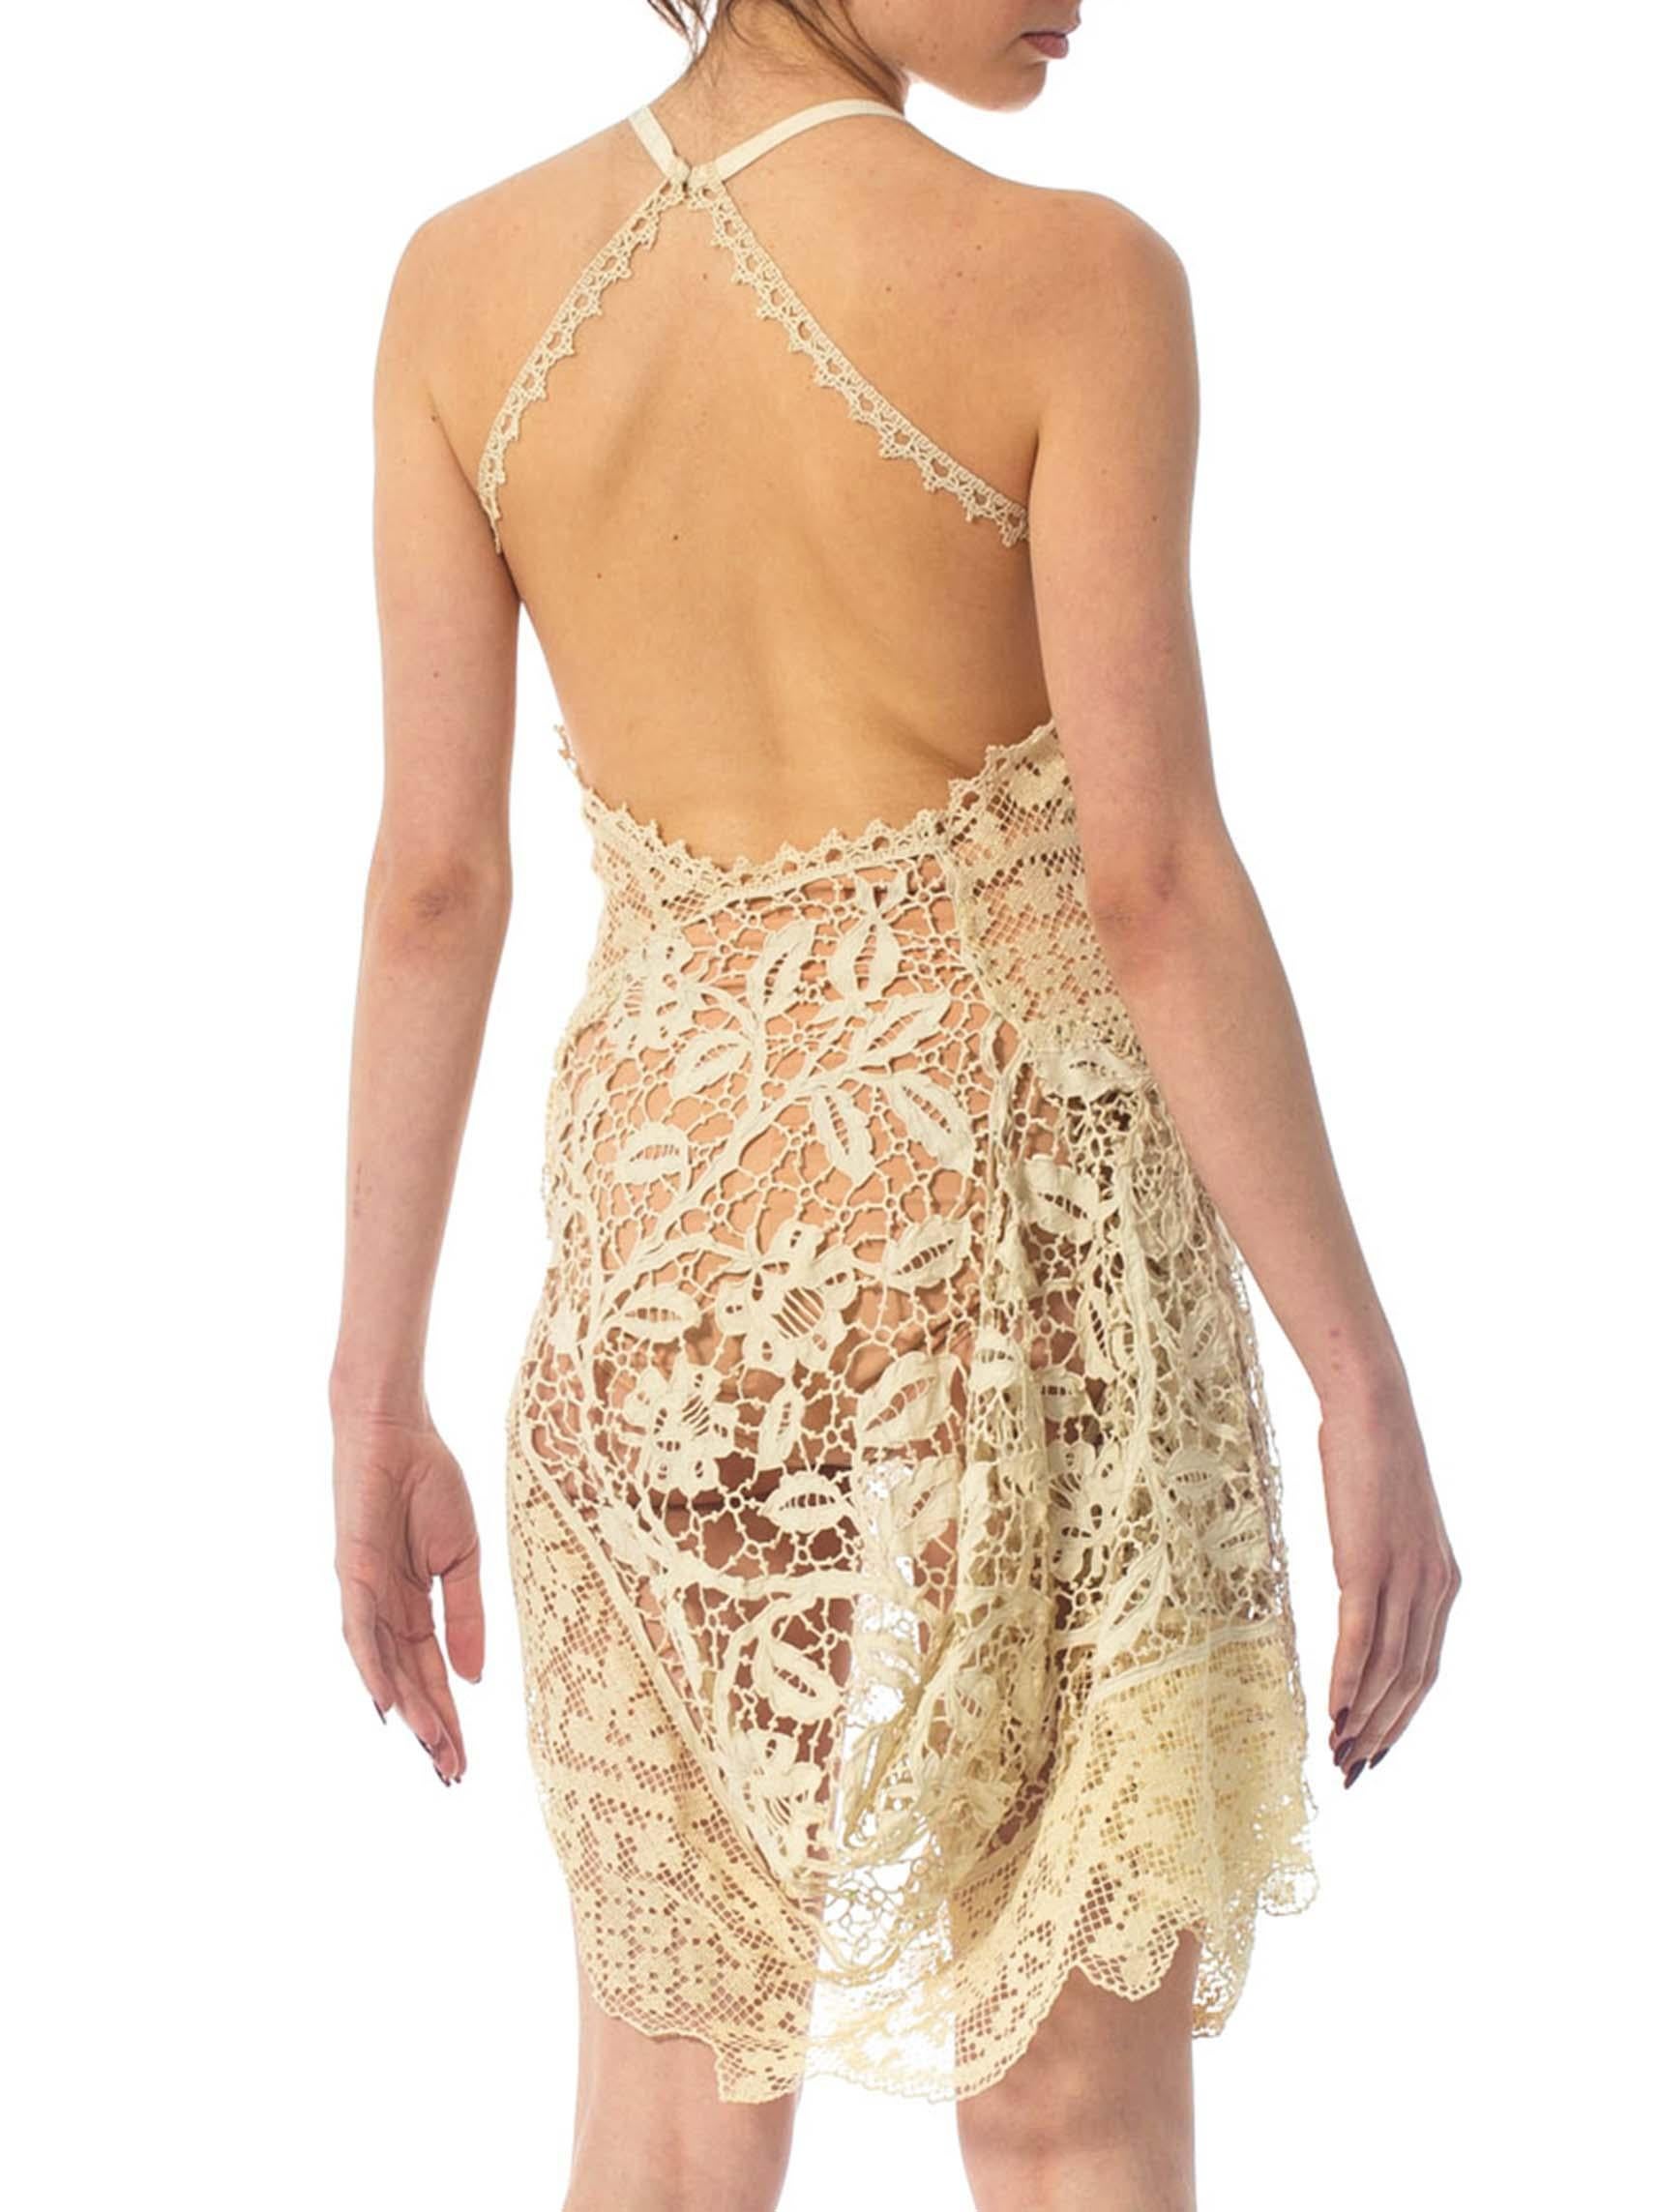 Women's MORPHEW COLLECTION Creme Dress Made From 100 Year Old Handmade Lace For Sale